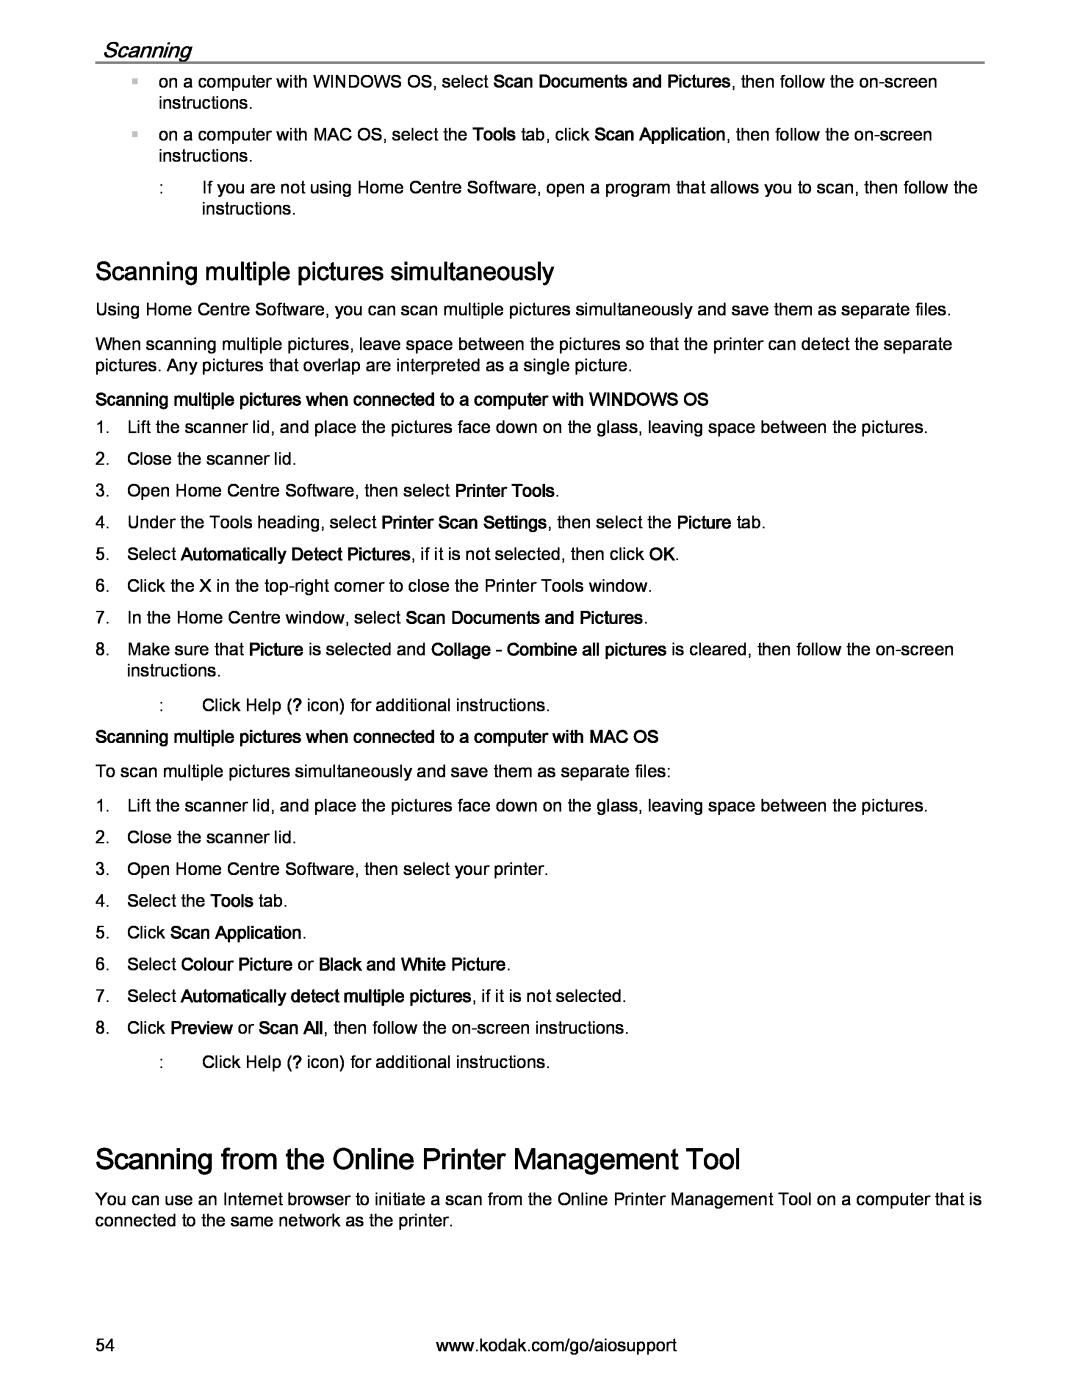 Kodak 2.2 manual Scanning from the Online Printer Management Tool, Scanning multiple pictures simultaneously 